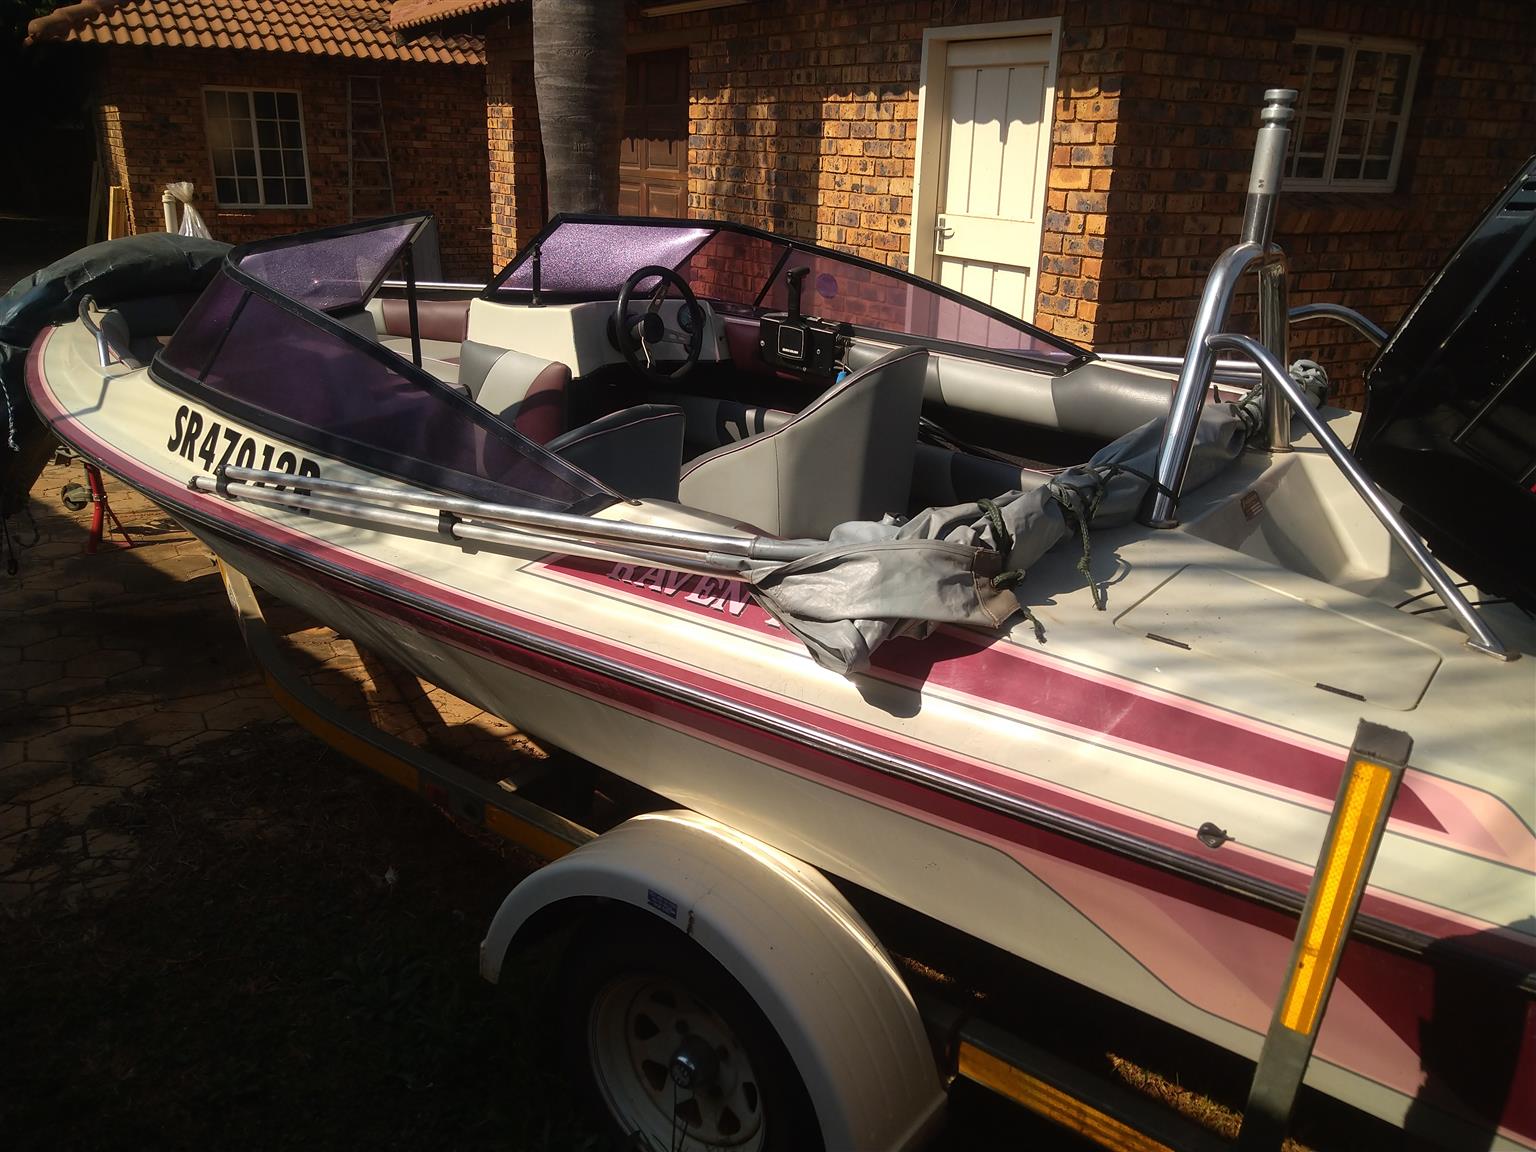 Raven Speed Boat for Sale